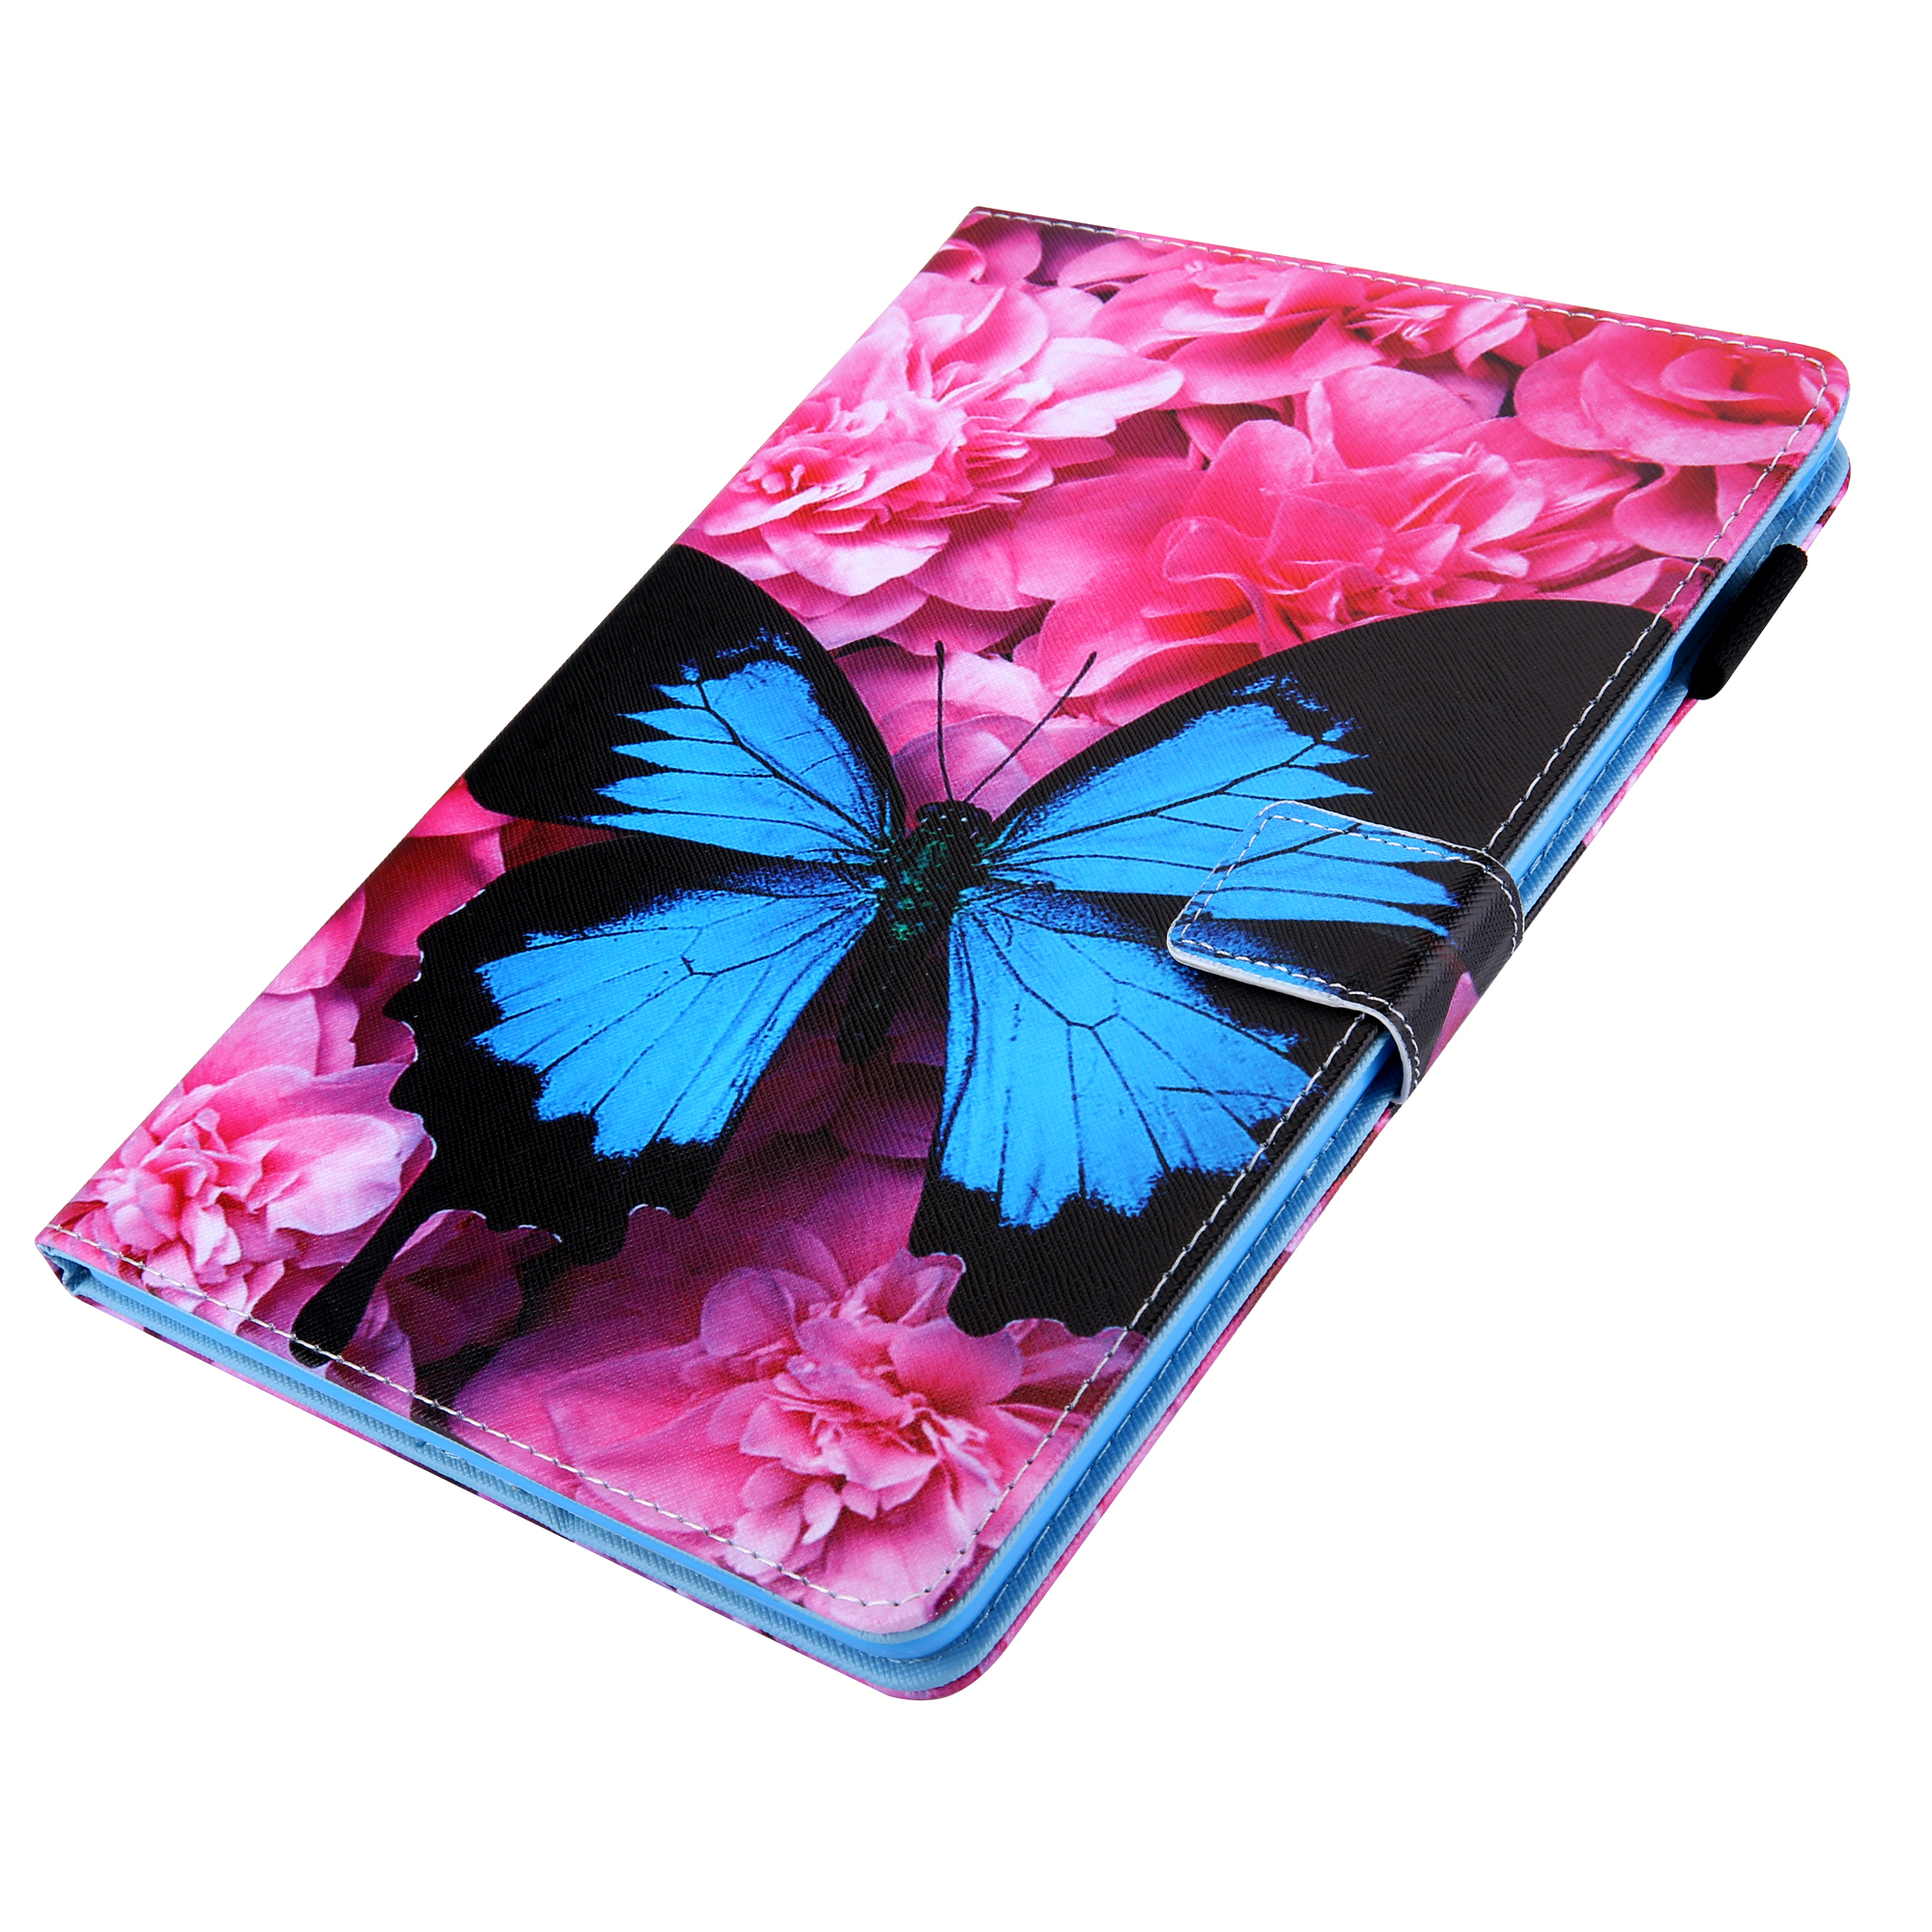 Fire HD 8 Case 2020, Fire HD 8 Plus Case 2020, Allytech PU Leather Slim Shockproof Auto Sleep Wake Folio Flip Smart Cover Pencil Holder Book Style Case for All-New Fire HD 8 10th Gen,Butterfly - image 4 of 7